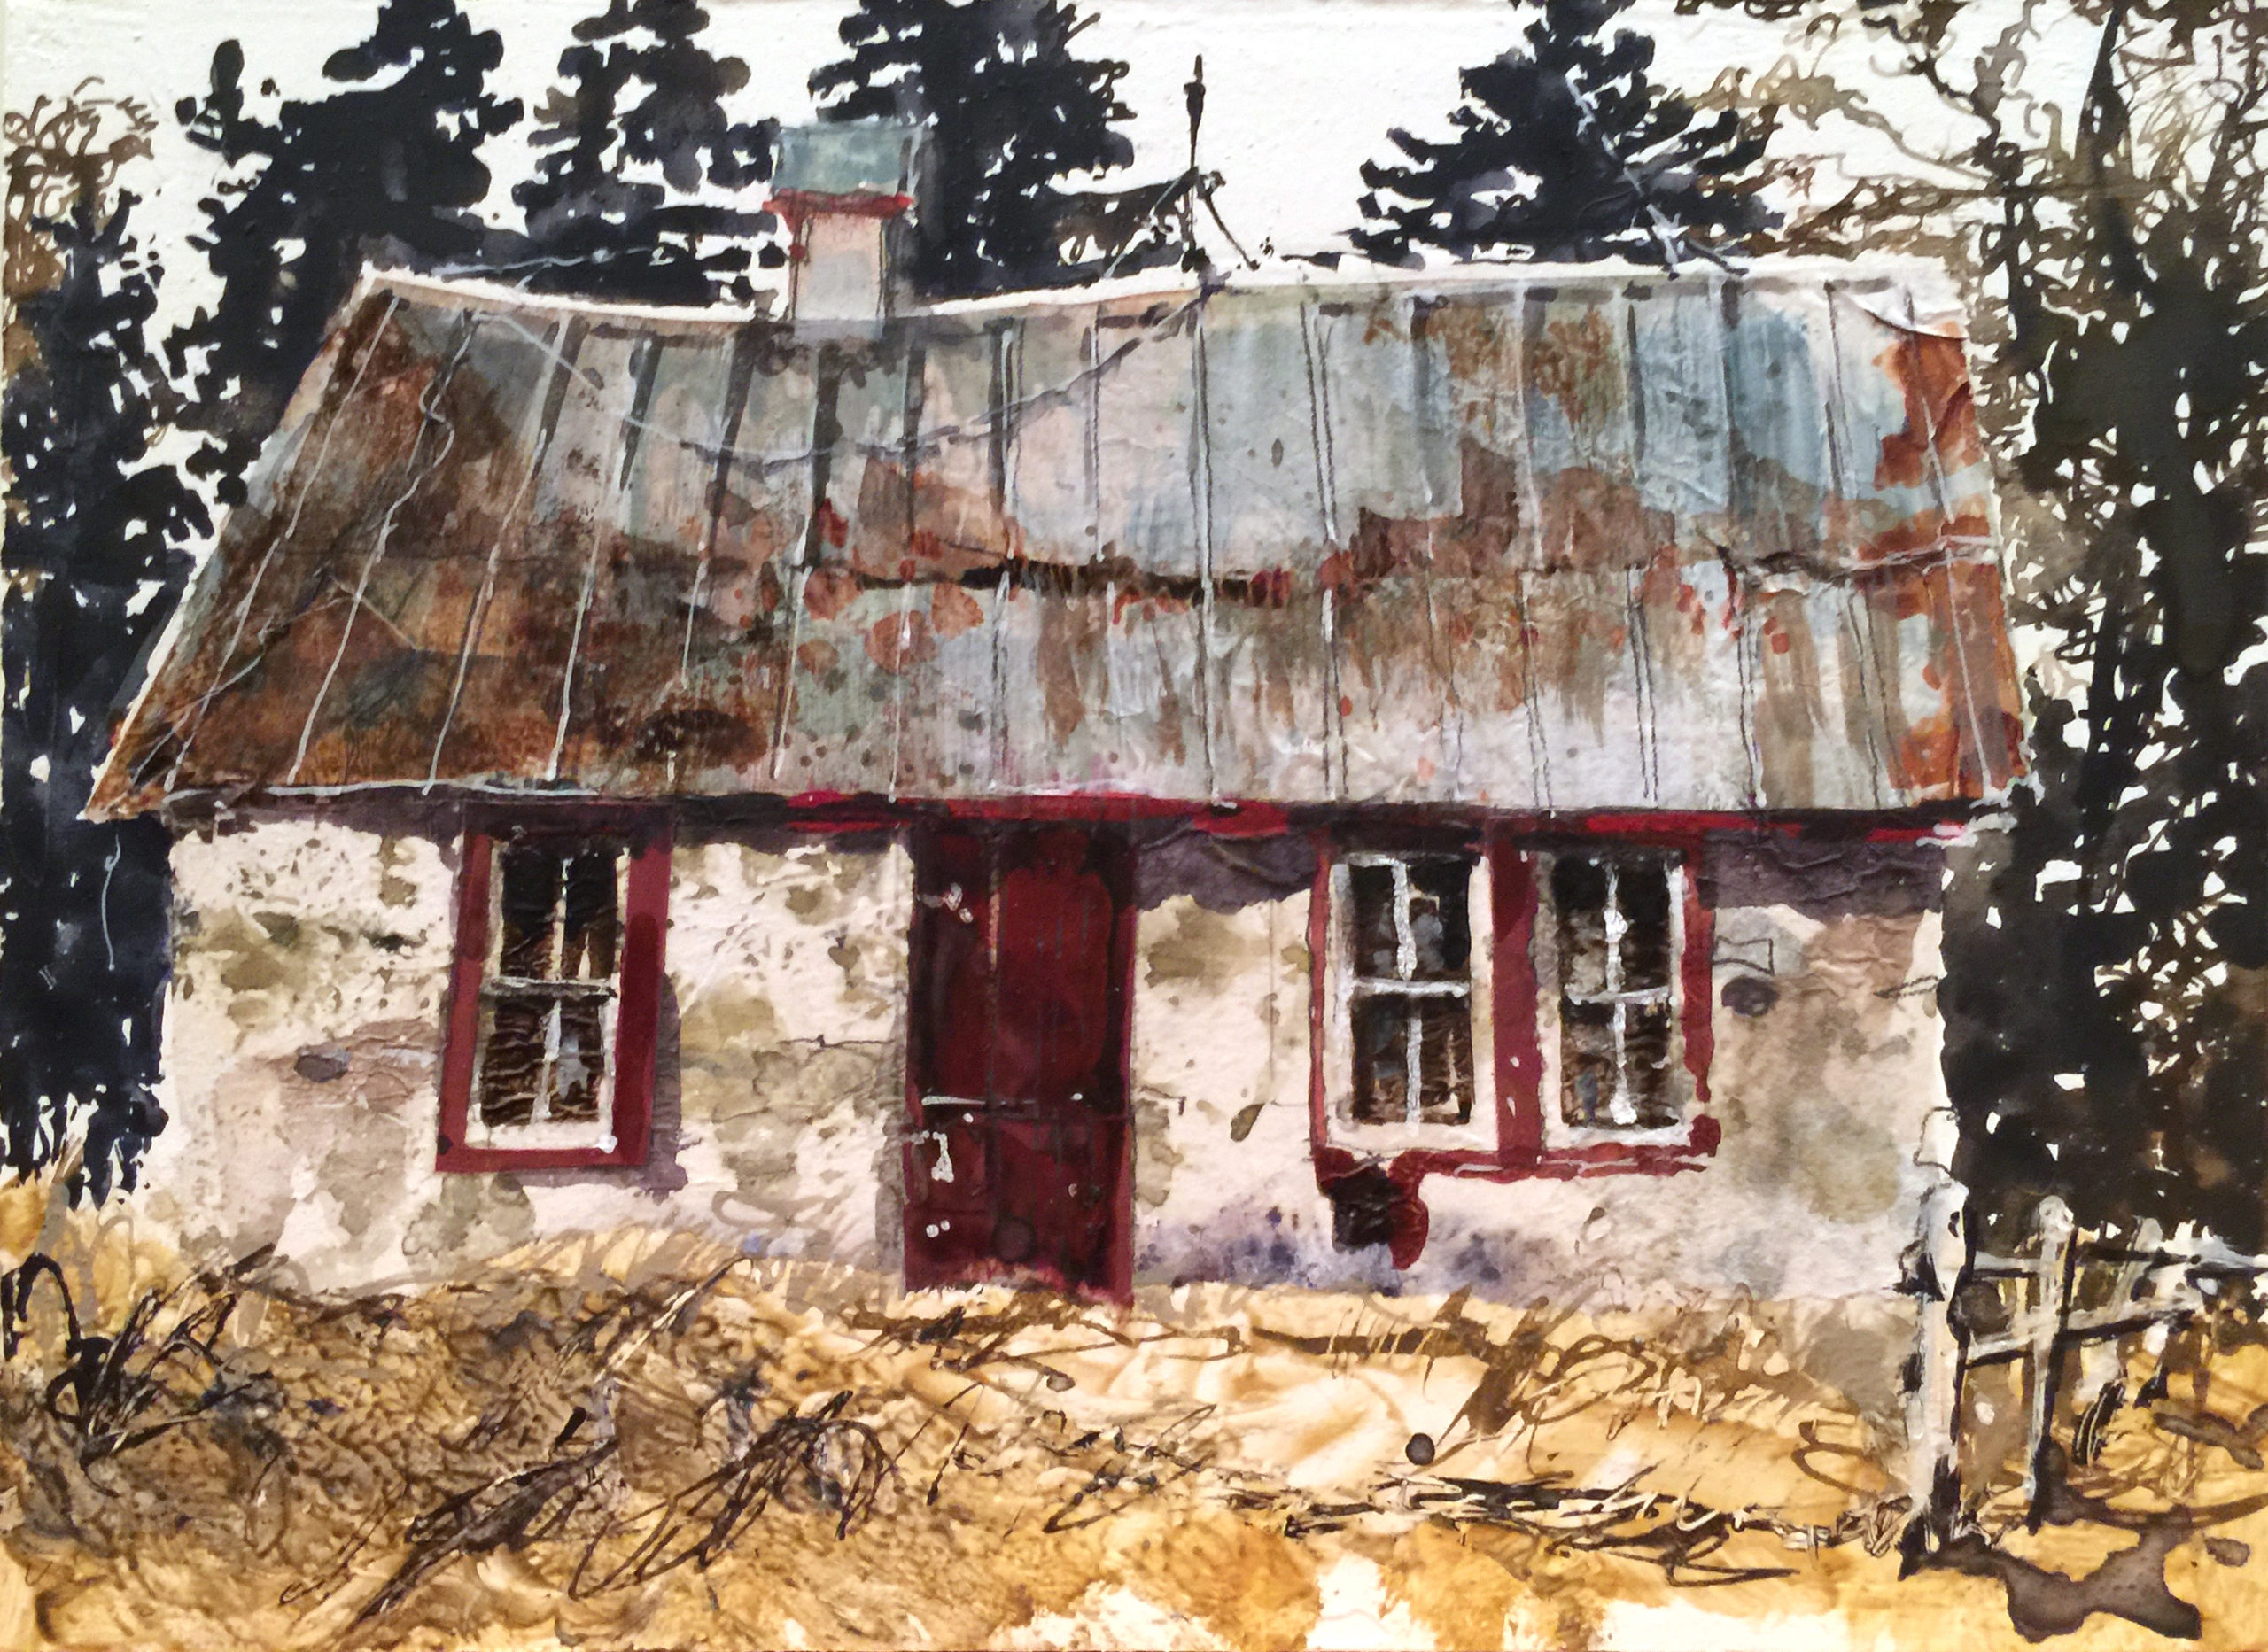 Mat Barber Kennedy, "Earl’s Dairy Barn," 2017, mixed water-based media, 5 x 7 in., Private collection, Plein air